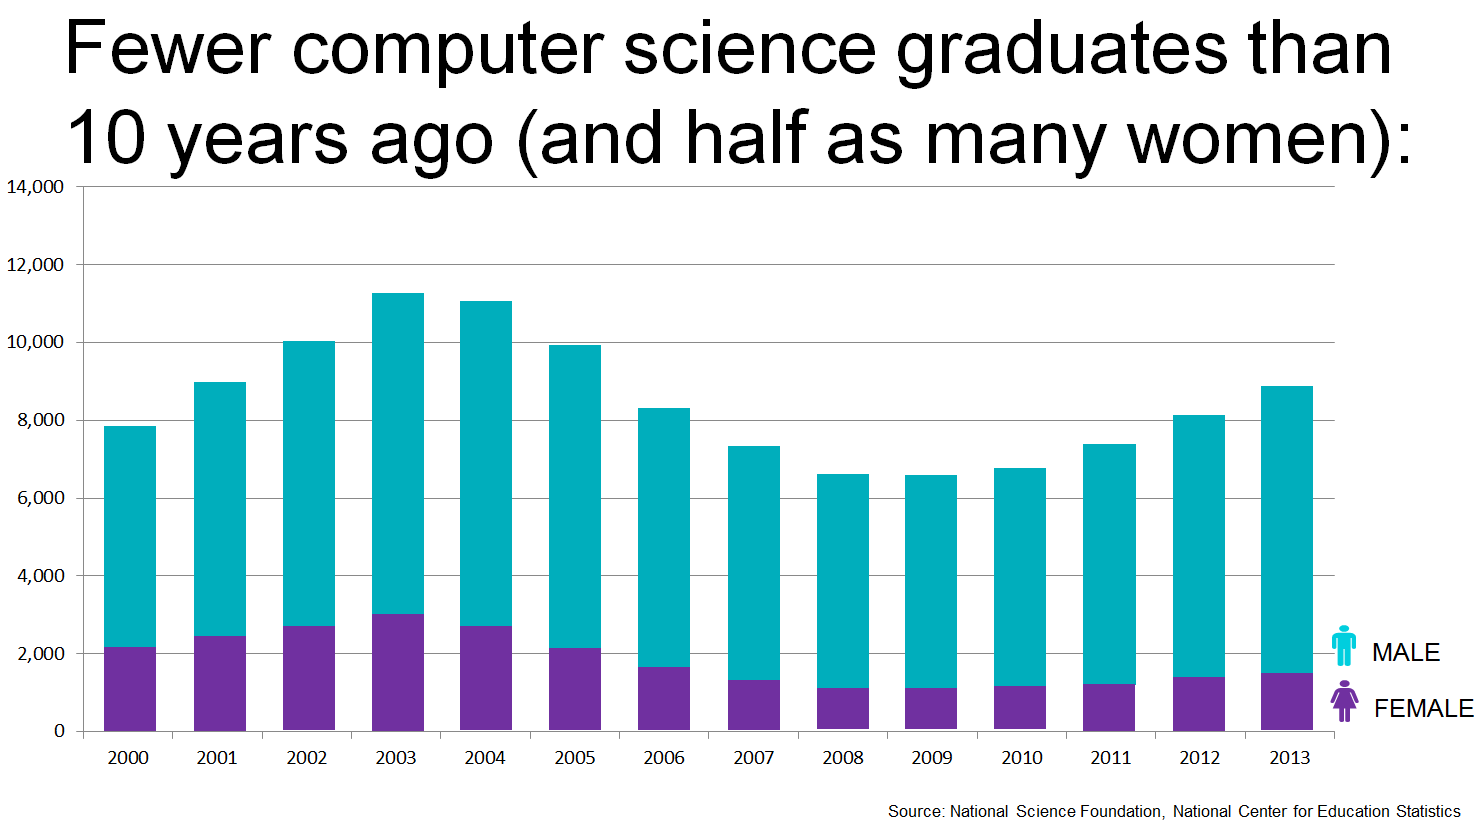 National Science Foundation chart showing the decline in Computer Science Graduates over the last decade